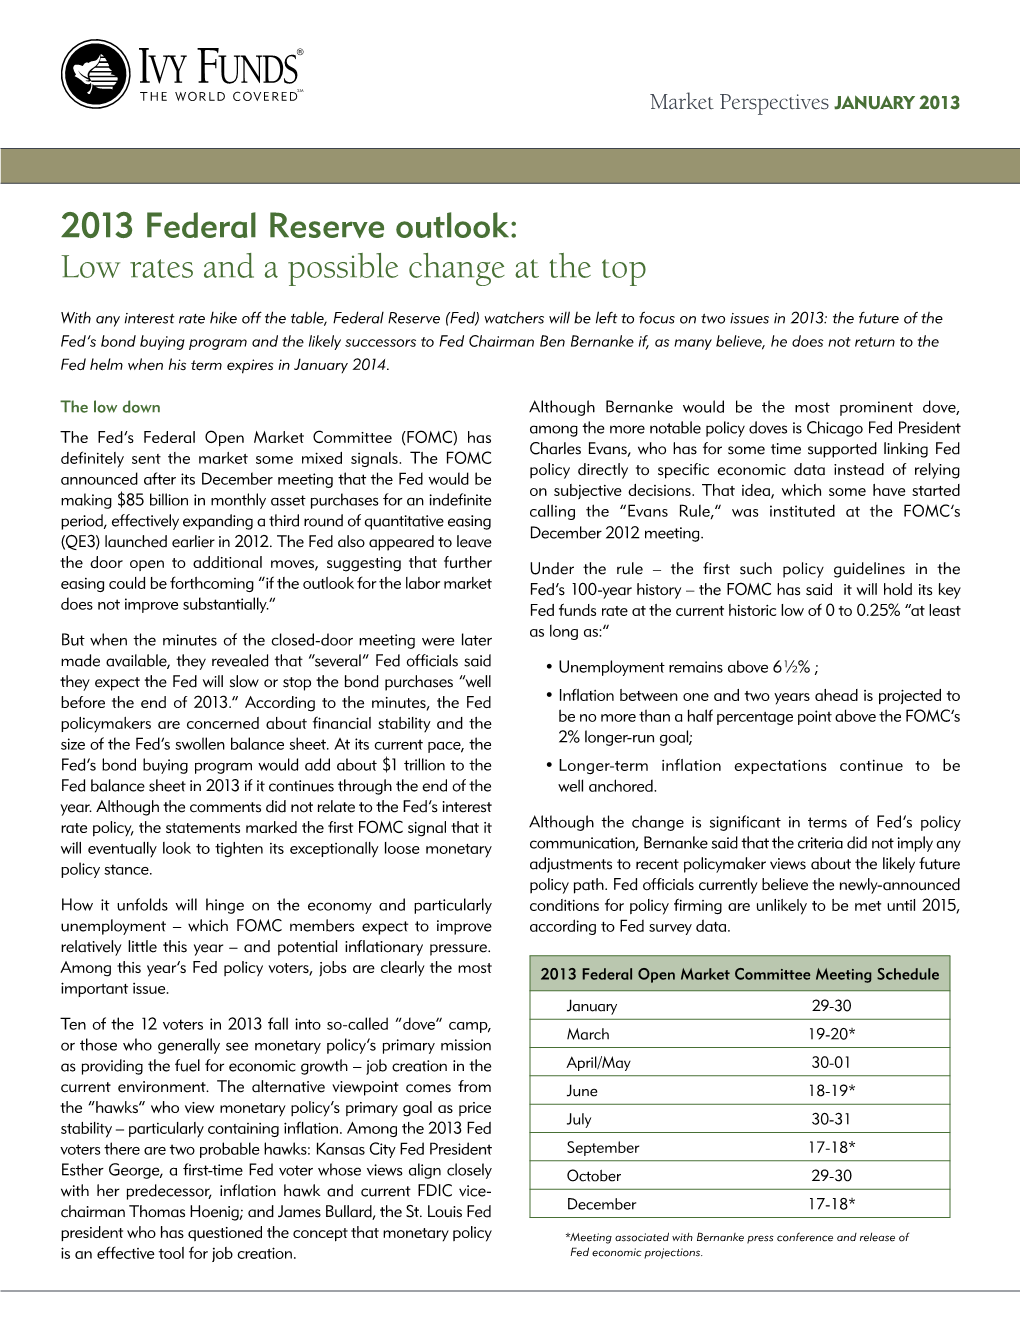 2013 Federal Reserve Outlook: Low Rates and a Possible Change at the Top